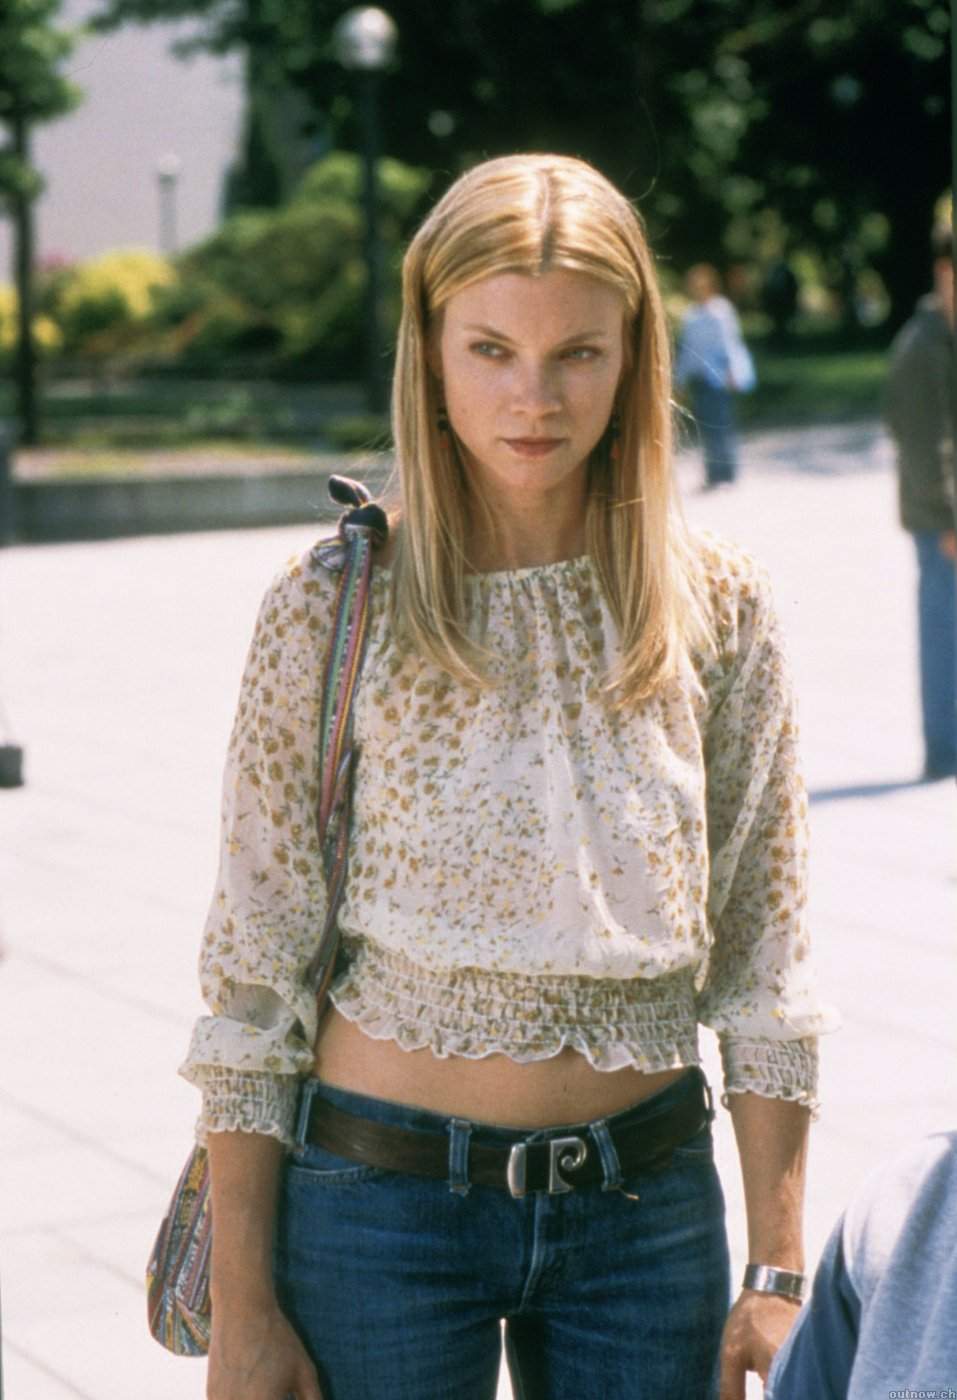 Amy Smart as Kayleigh Miller in New Line Cinema' The Butterfly Effect (2004)